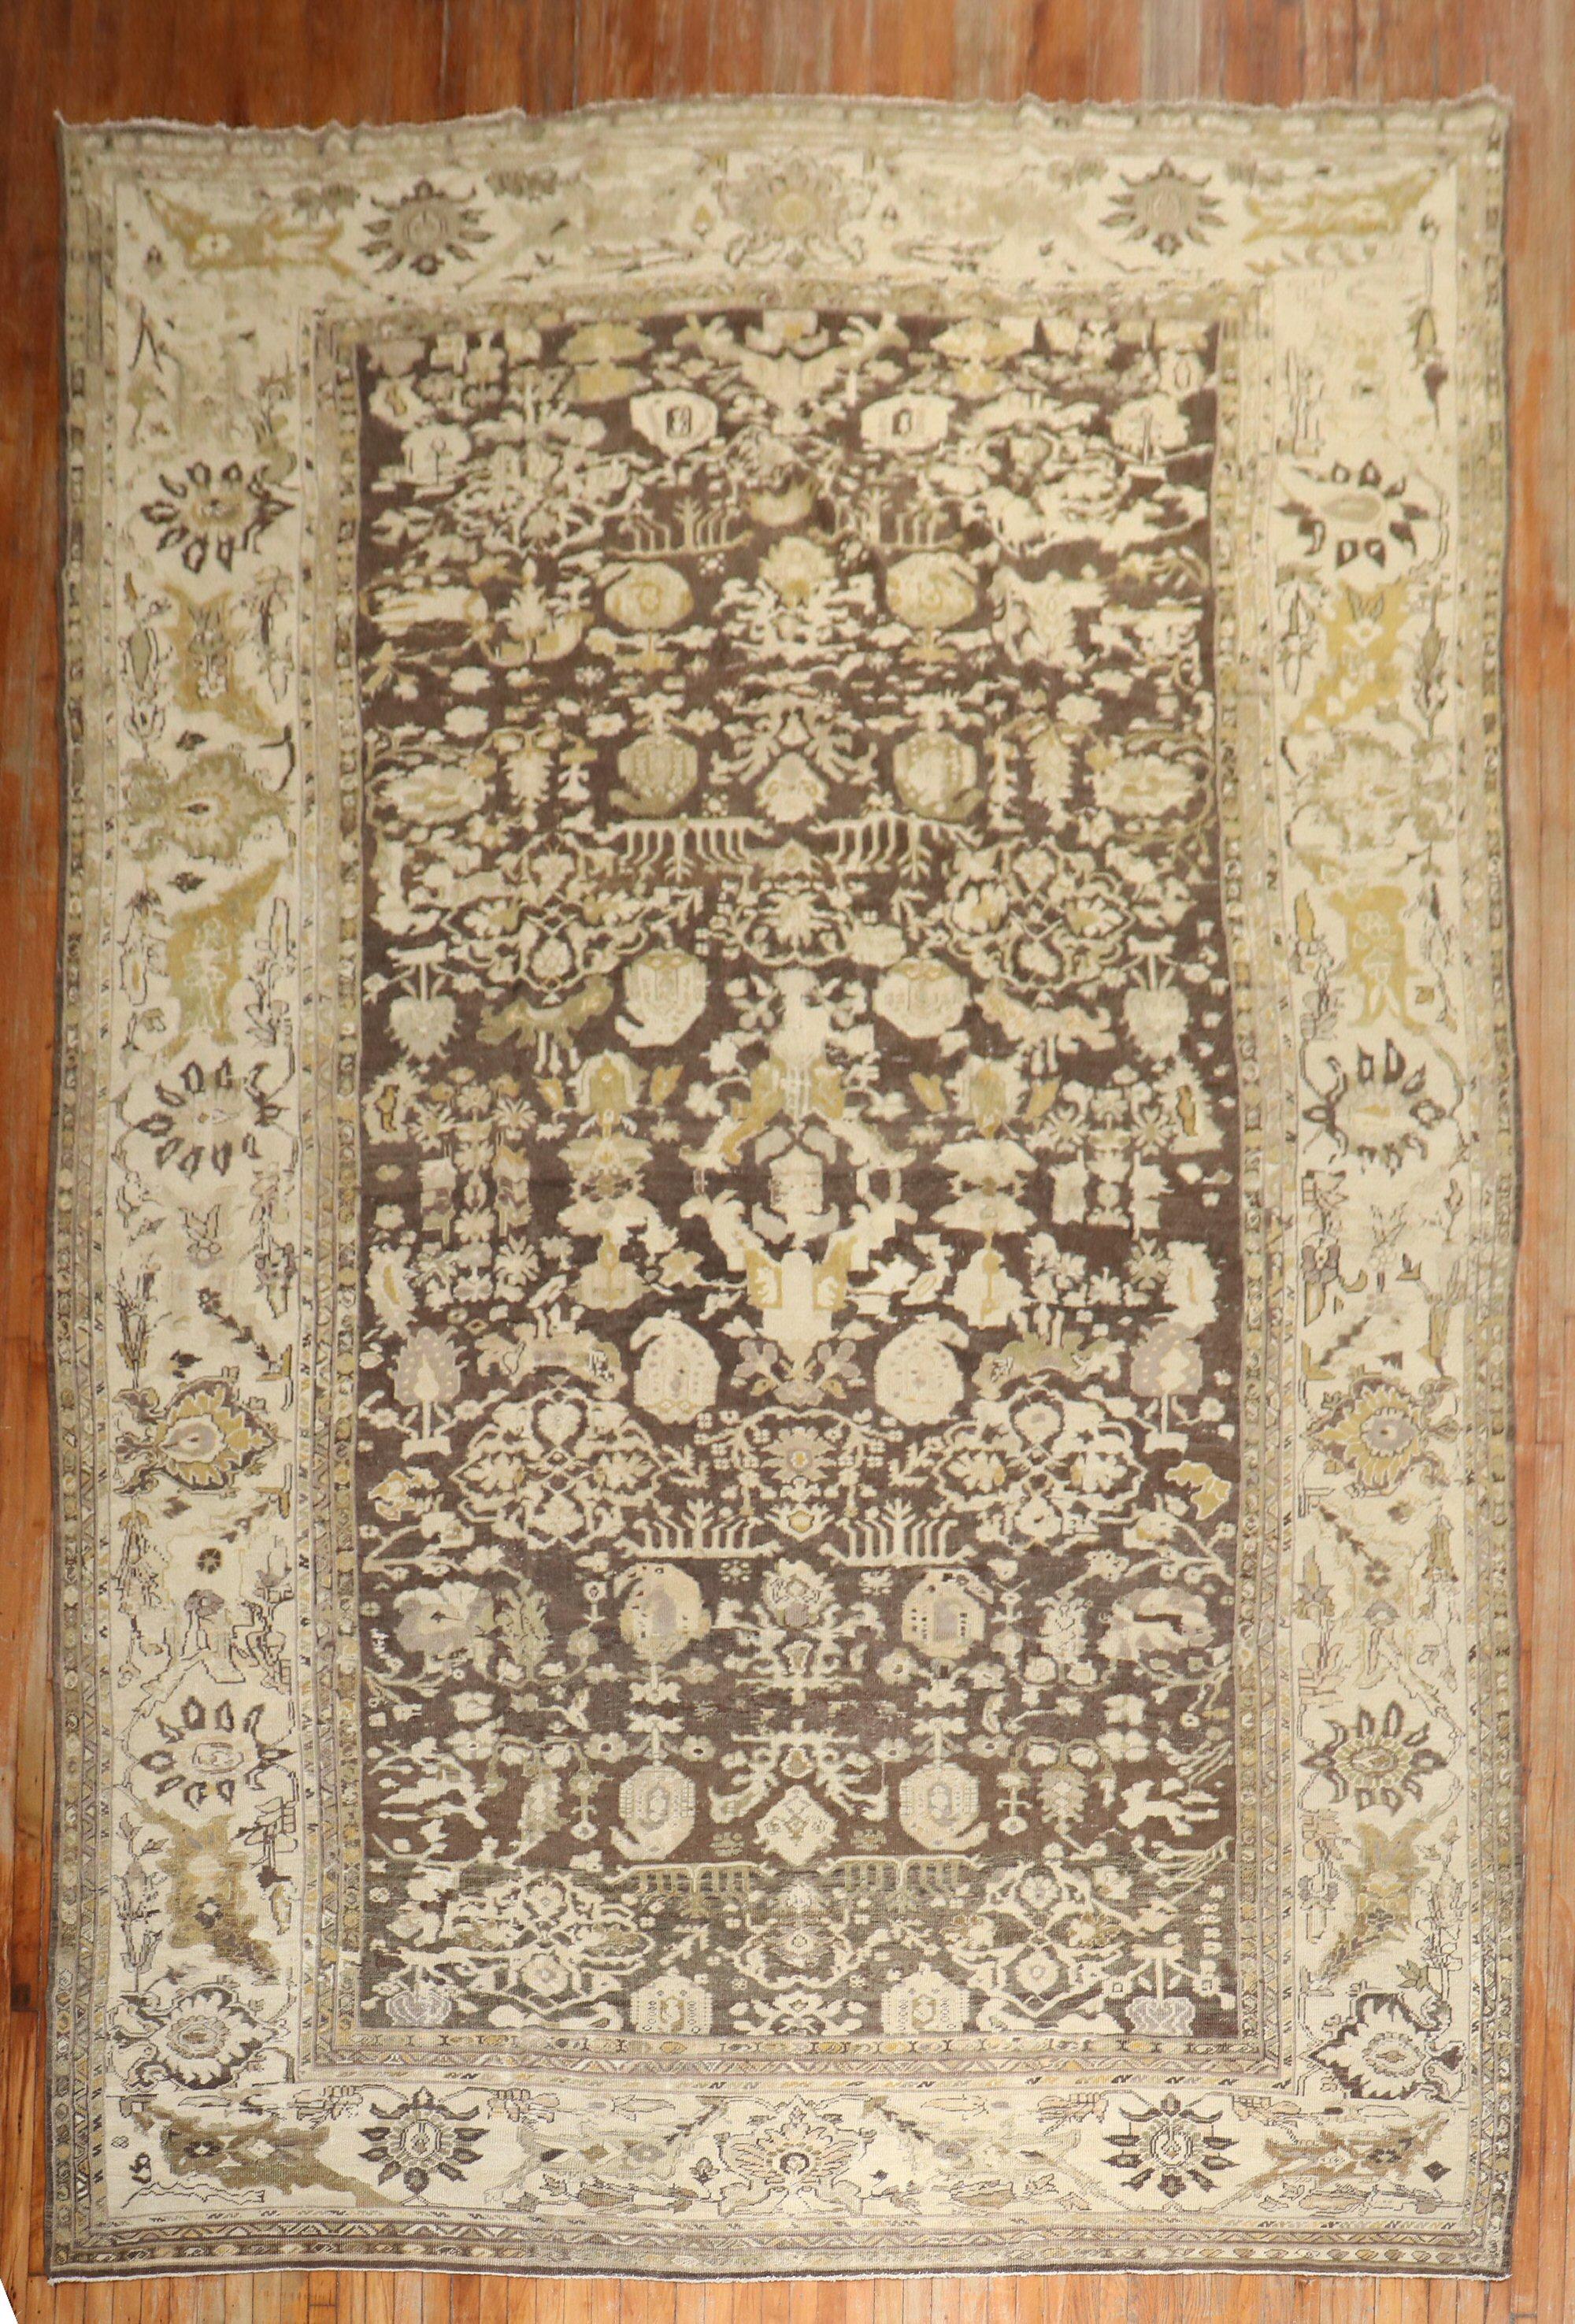 An early 20th century antique Persian Sultanabad rug in brown, ivory, and goldenrod

Measures: 10' x 16'2''.